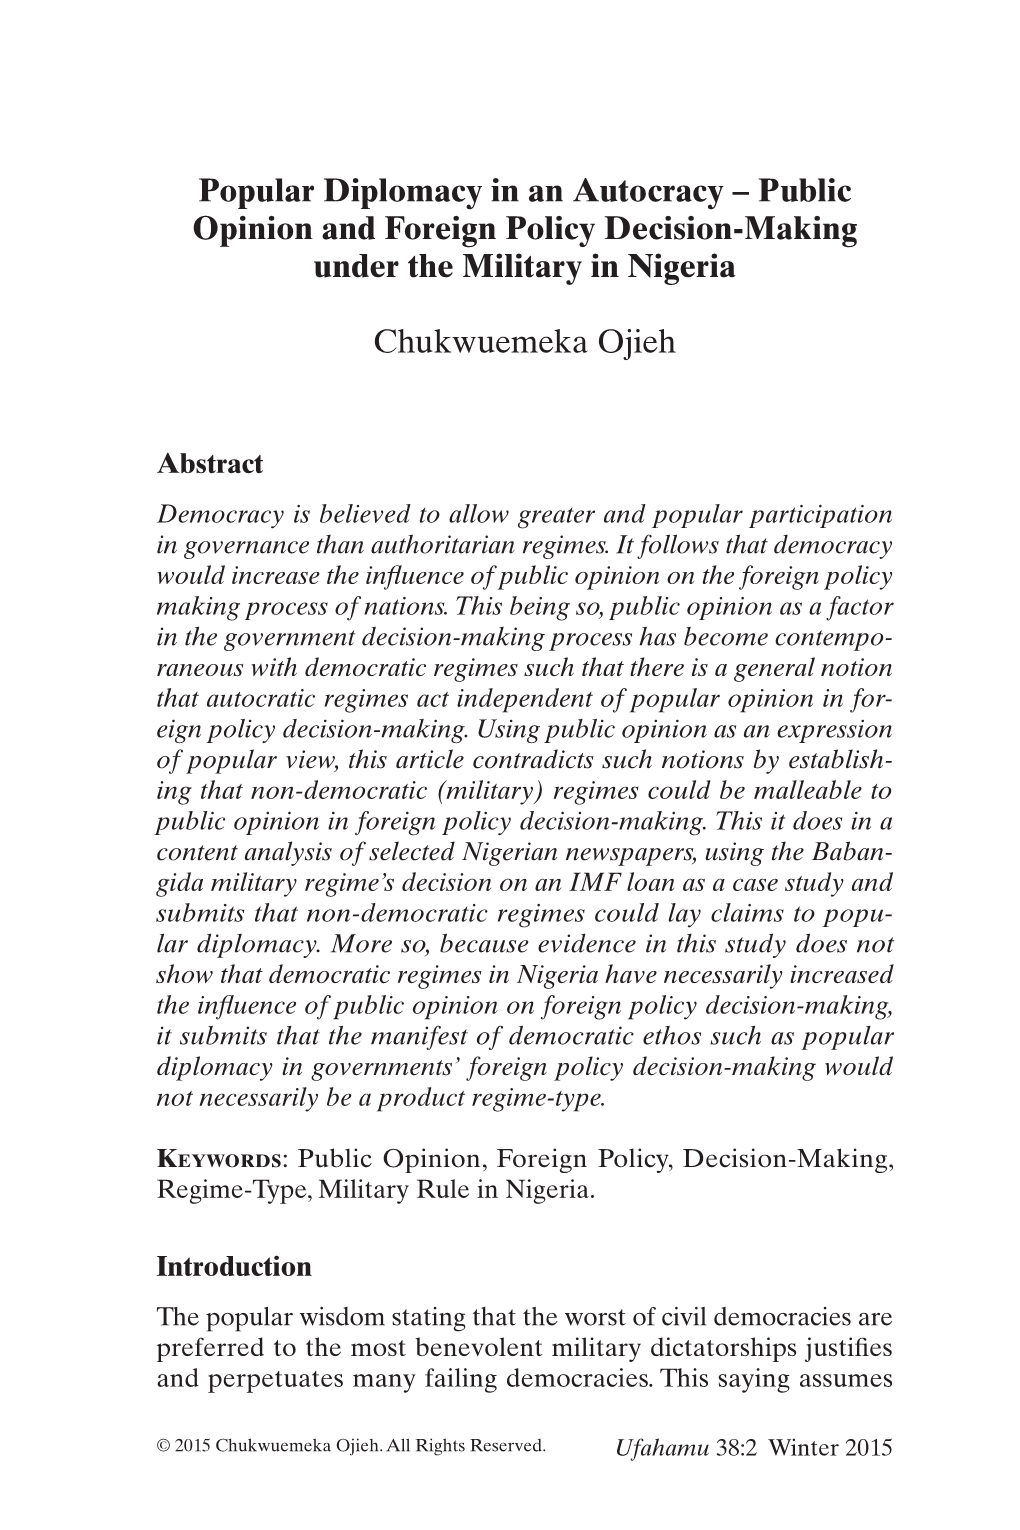 Public Opinion and Foreign Policy Decision-Making Under the Military in Nigeria